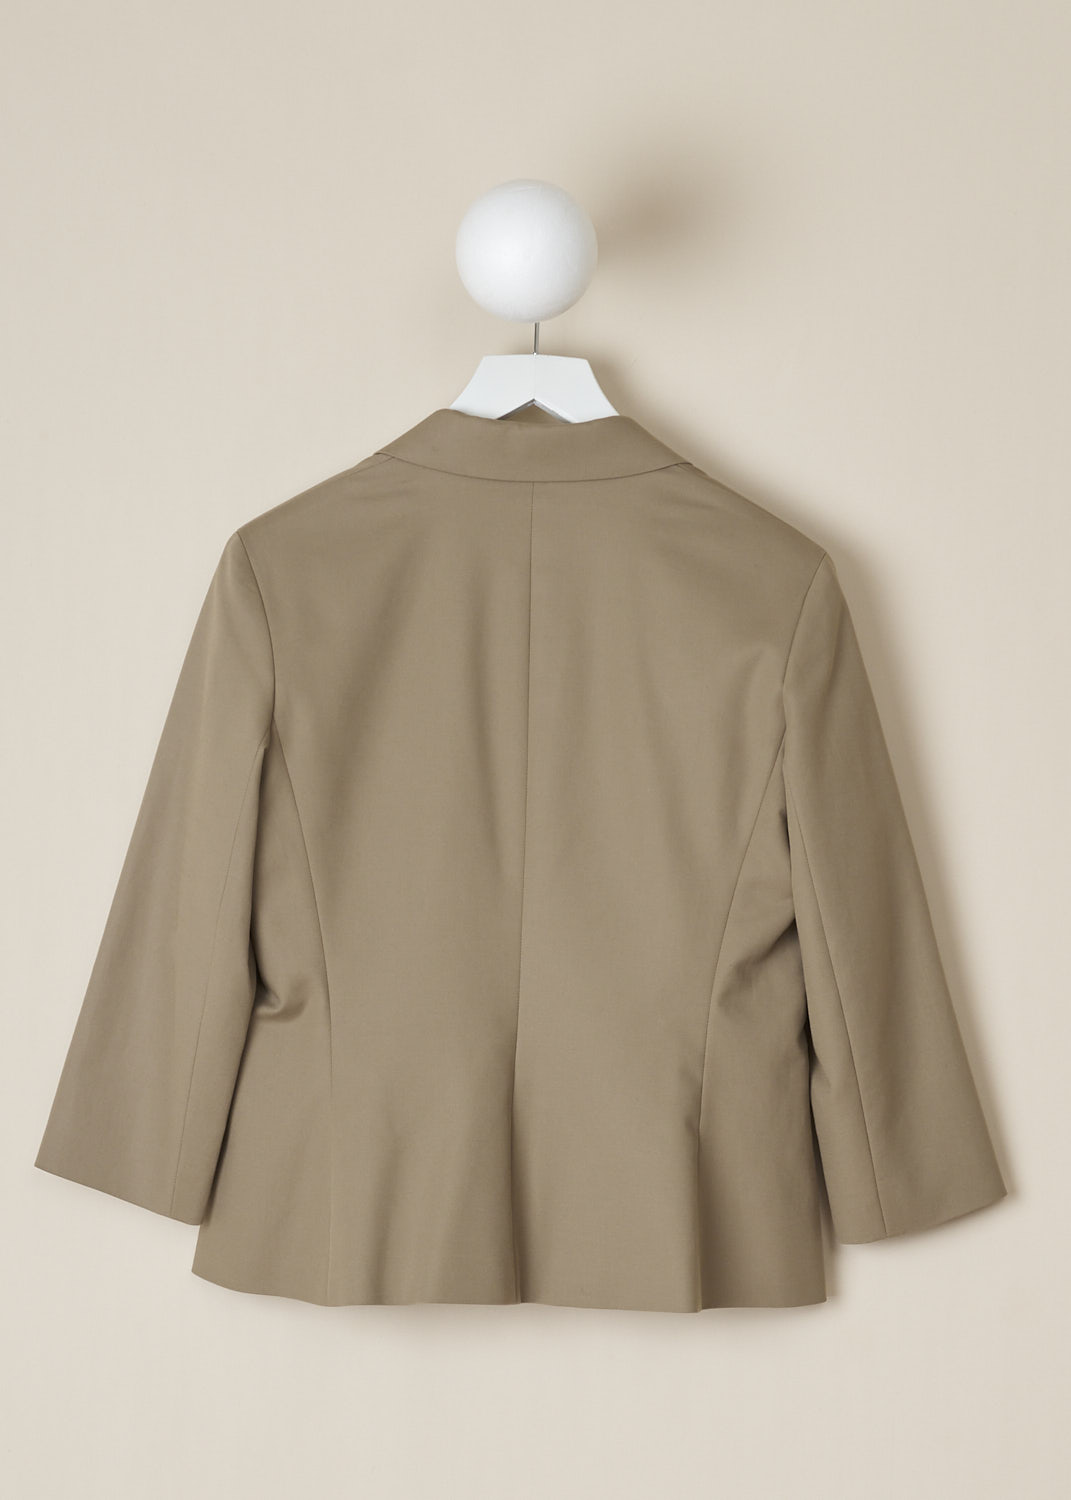 THE ROW, REMY JACKET IN SEPIA, REMY_JACKET_1113W580_SEPIA, Beige, Brown, Back, This cropped Sepia colored jacket has a notched lapel and a front button closure. The jacket has three-quarter sleeves. In the front, the jacket has welt pockets. 


